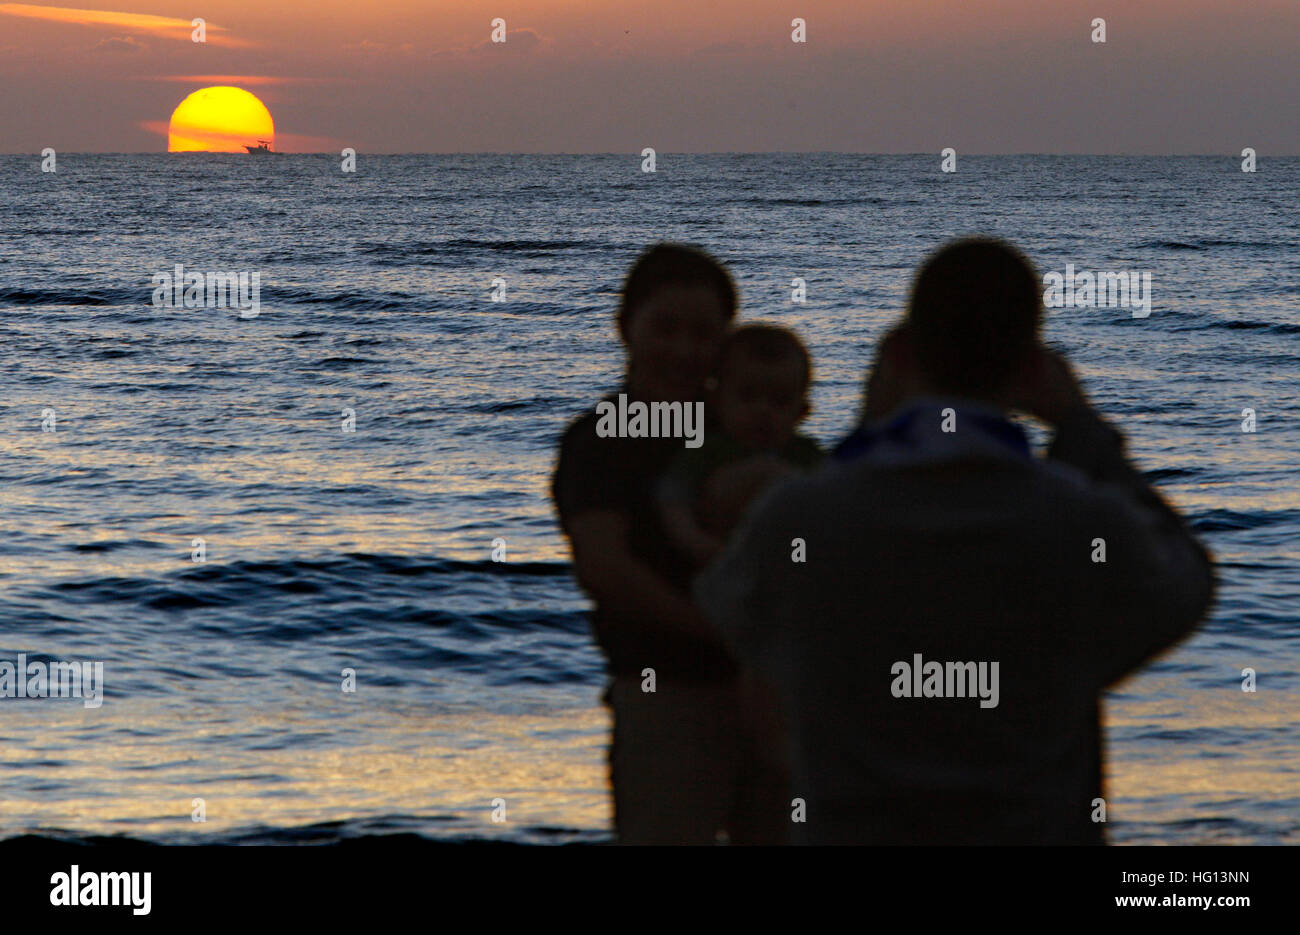 Florida, USA. 3rd Jan, 2017. 1010110 (Lannis Waters/The Palm Beach Post) LAKE WORTH - Lee Tanton (cq) takes a photo of his wife Jae Eun Kim (cq) and their son, Richard Kim Tanton (cq) at Lake Worth Municipal Beach as the sun rises New Years Day. It's Richard's first New Year; he was born January 2 last year. Jae says it is a tradition in her culture to greet the first sunrise of the year and make wishes for the new year, and she wants to continue the tradition here. © Lannis Waters/The Palm Beach Post/ZUMA Wire/Alamy Live News Stock Photo